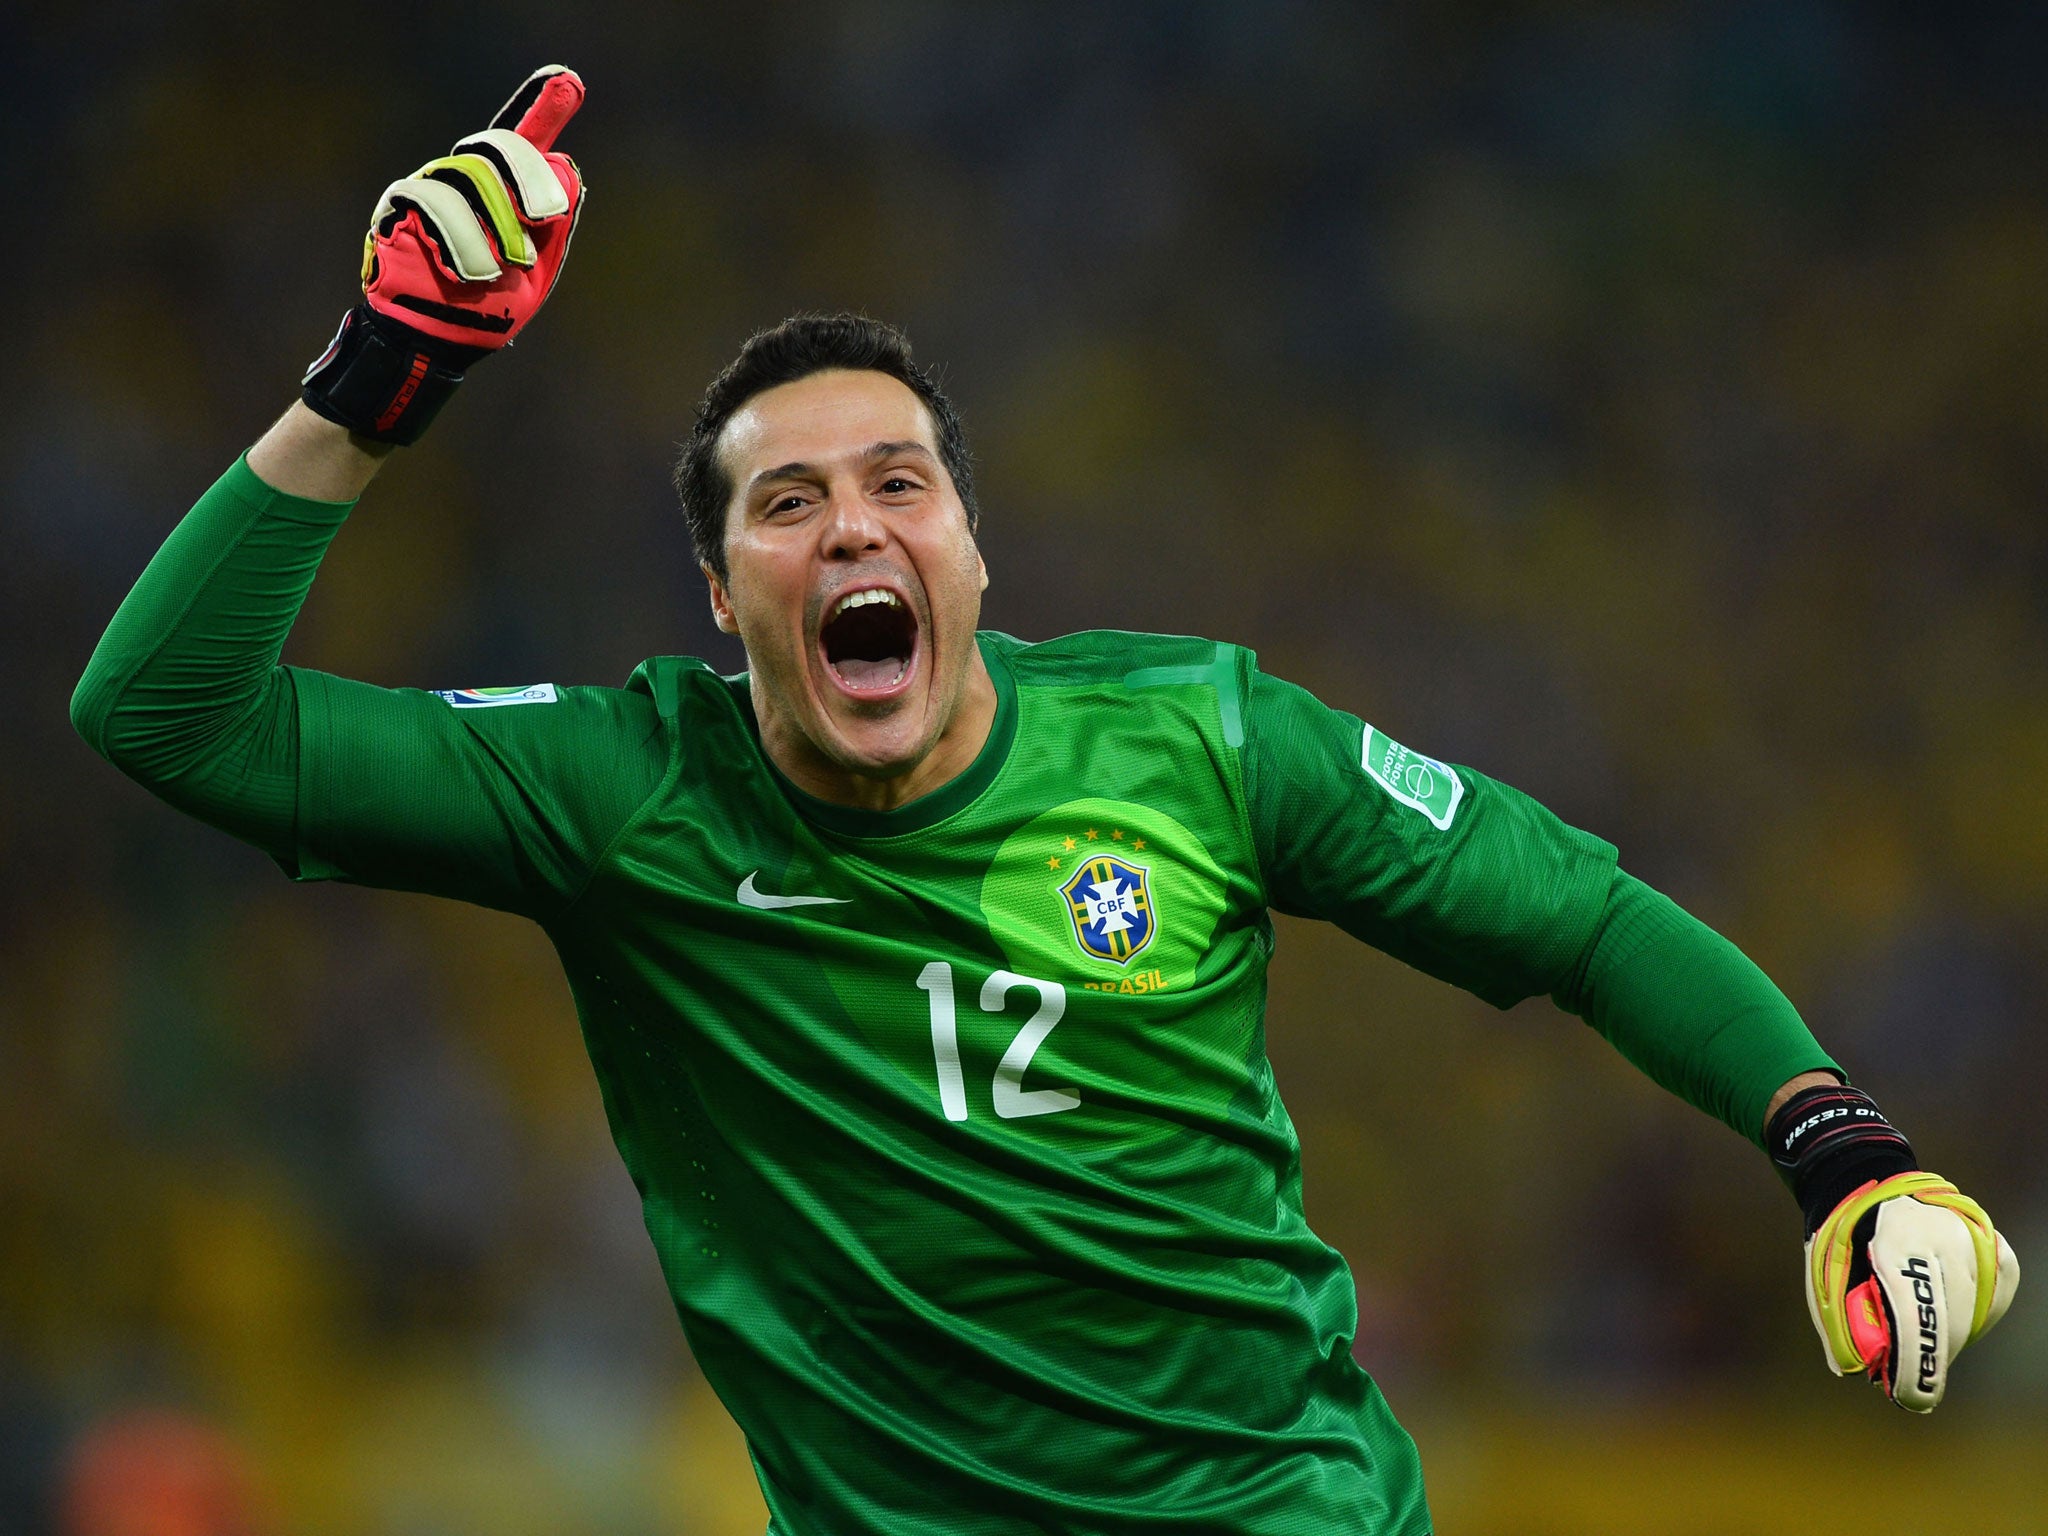 Arsenal’s pursuit of Queen’s Park Rangers goalkeeper Julio Cesar looks set to end in disappointment with Rafa Benitez on the verge of taking the Brazilian on a season’s loan at Napoli